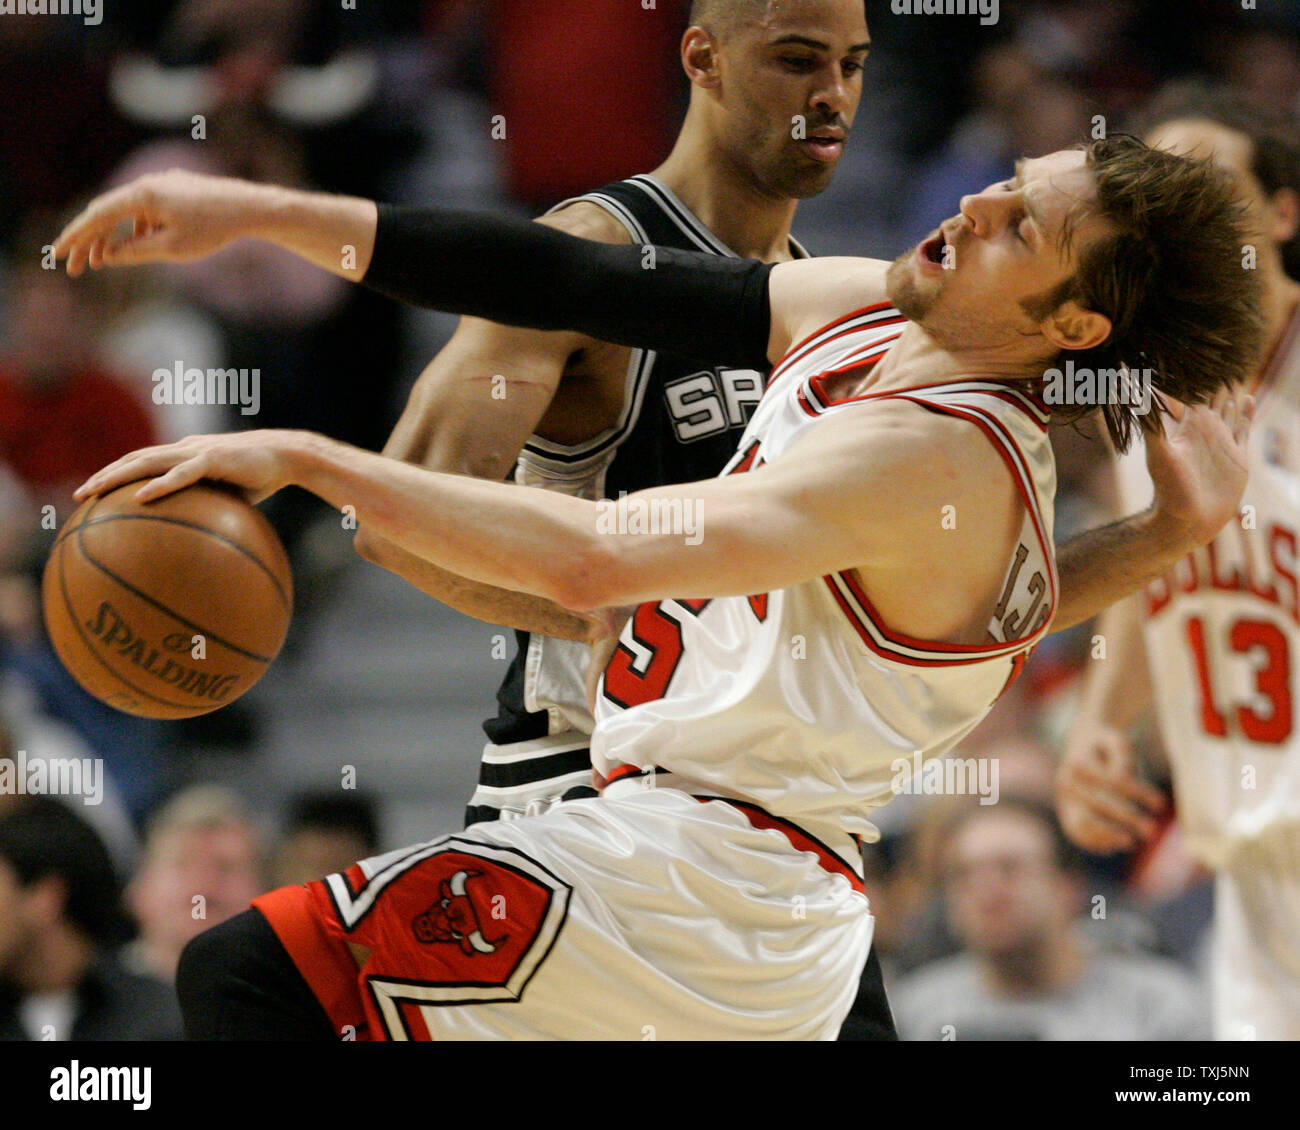 San Antonio Spurs Ime Udoka (L) fouls Chicago Bulls forward Andres Nocioni of Argentina during the fourth quarter in Chicago on March 20, 2008. The Spurs won 102-80. (UPI Photo/Brian Kersey) Stock Photo